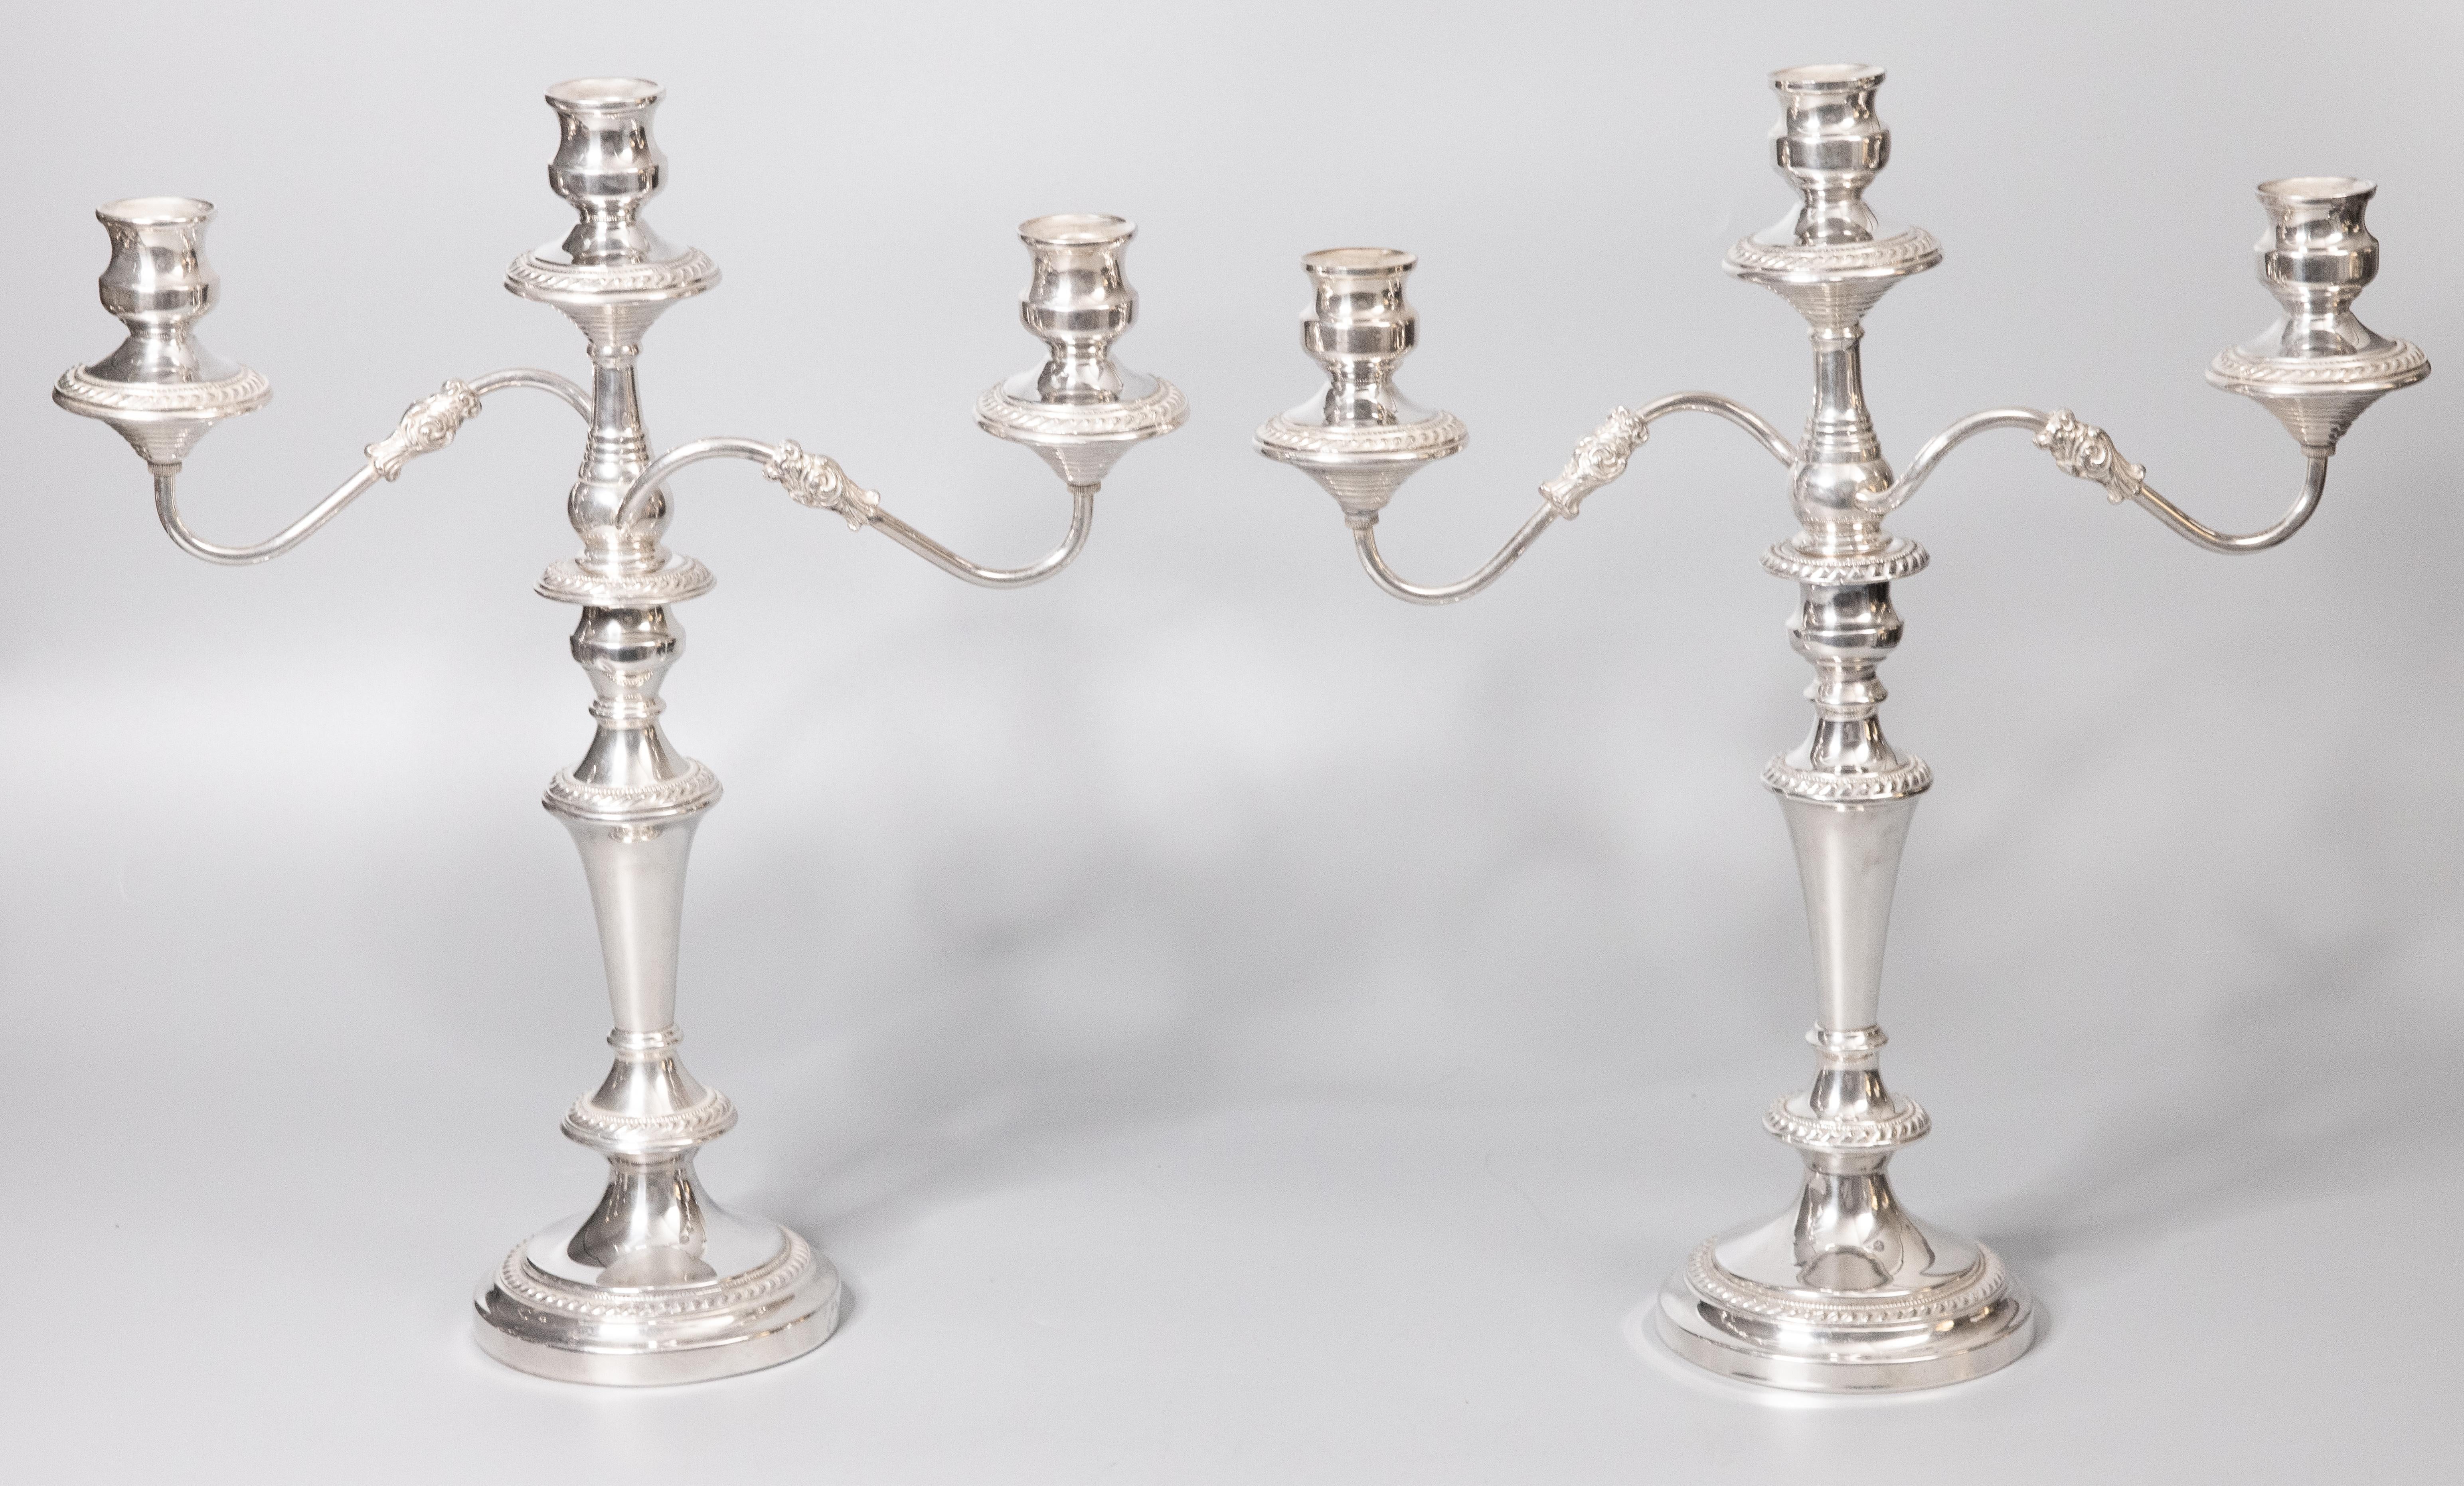 A superb pair of antique silverplate 3 light convertible candelabras. Hallmarks on reverse. These fine quality candle holders are large and heavy weighing over 9 lbs together with beautiful details. They would make a gorgeous centerpiece for a